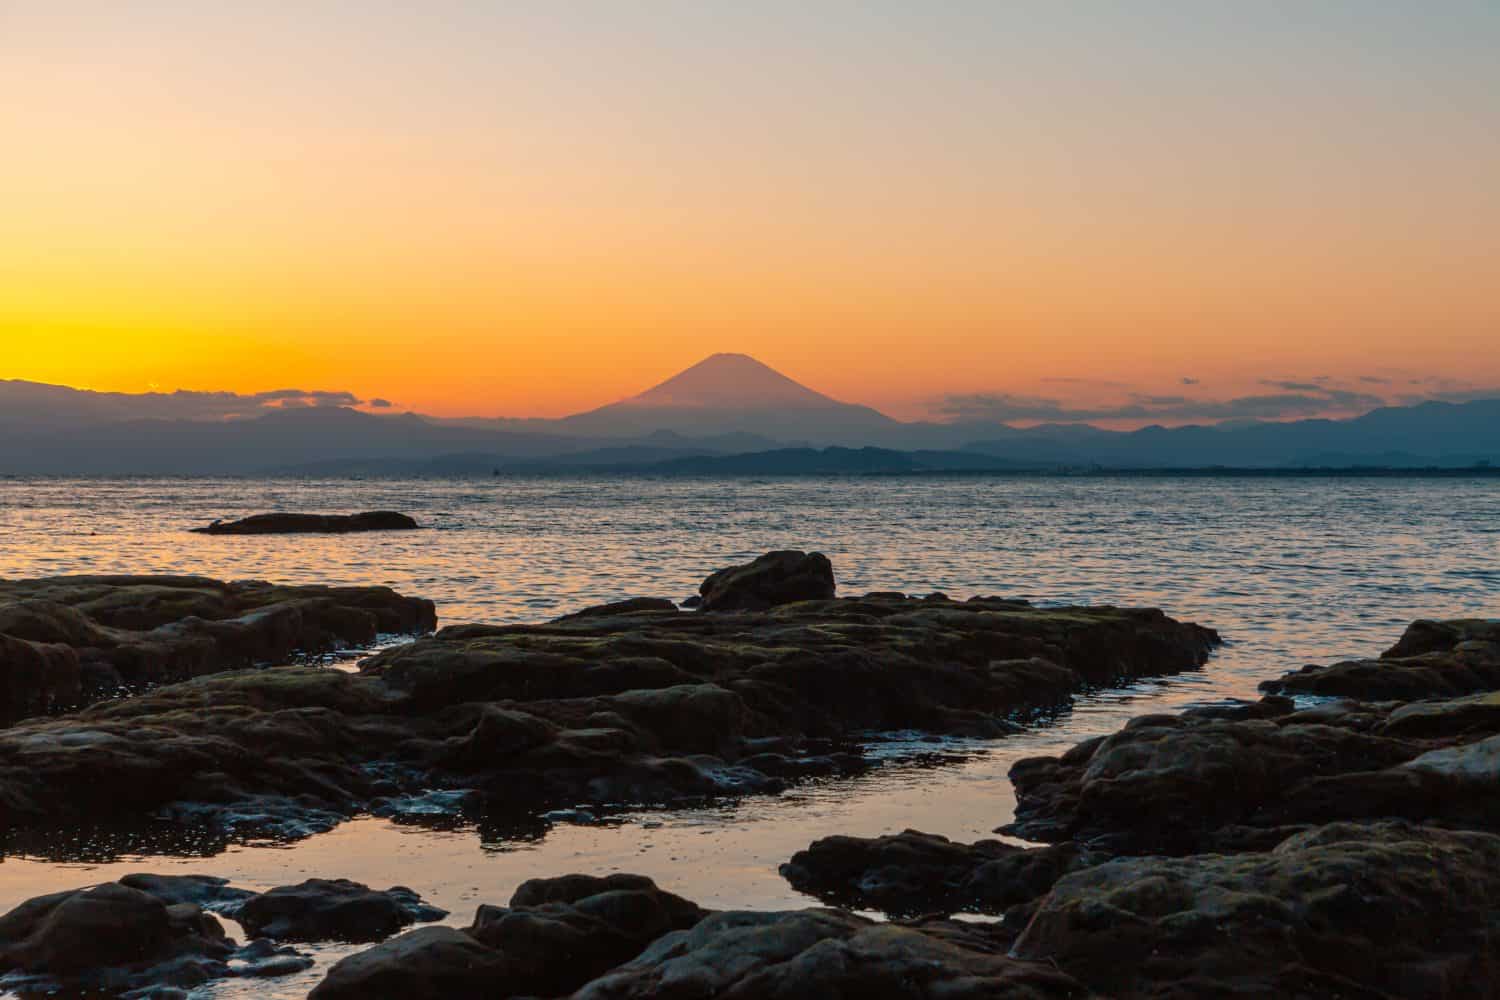 Twilight silhouette of Mount Fuji and the seashore at Enoshima Island It is a famous place in Kamakura. Japan